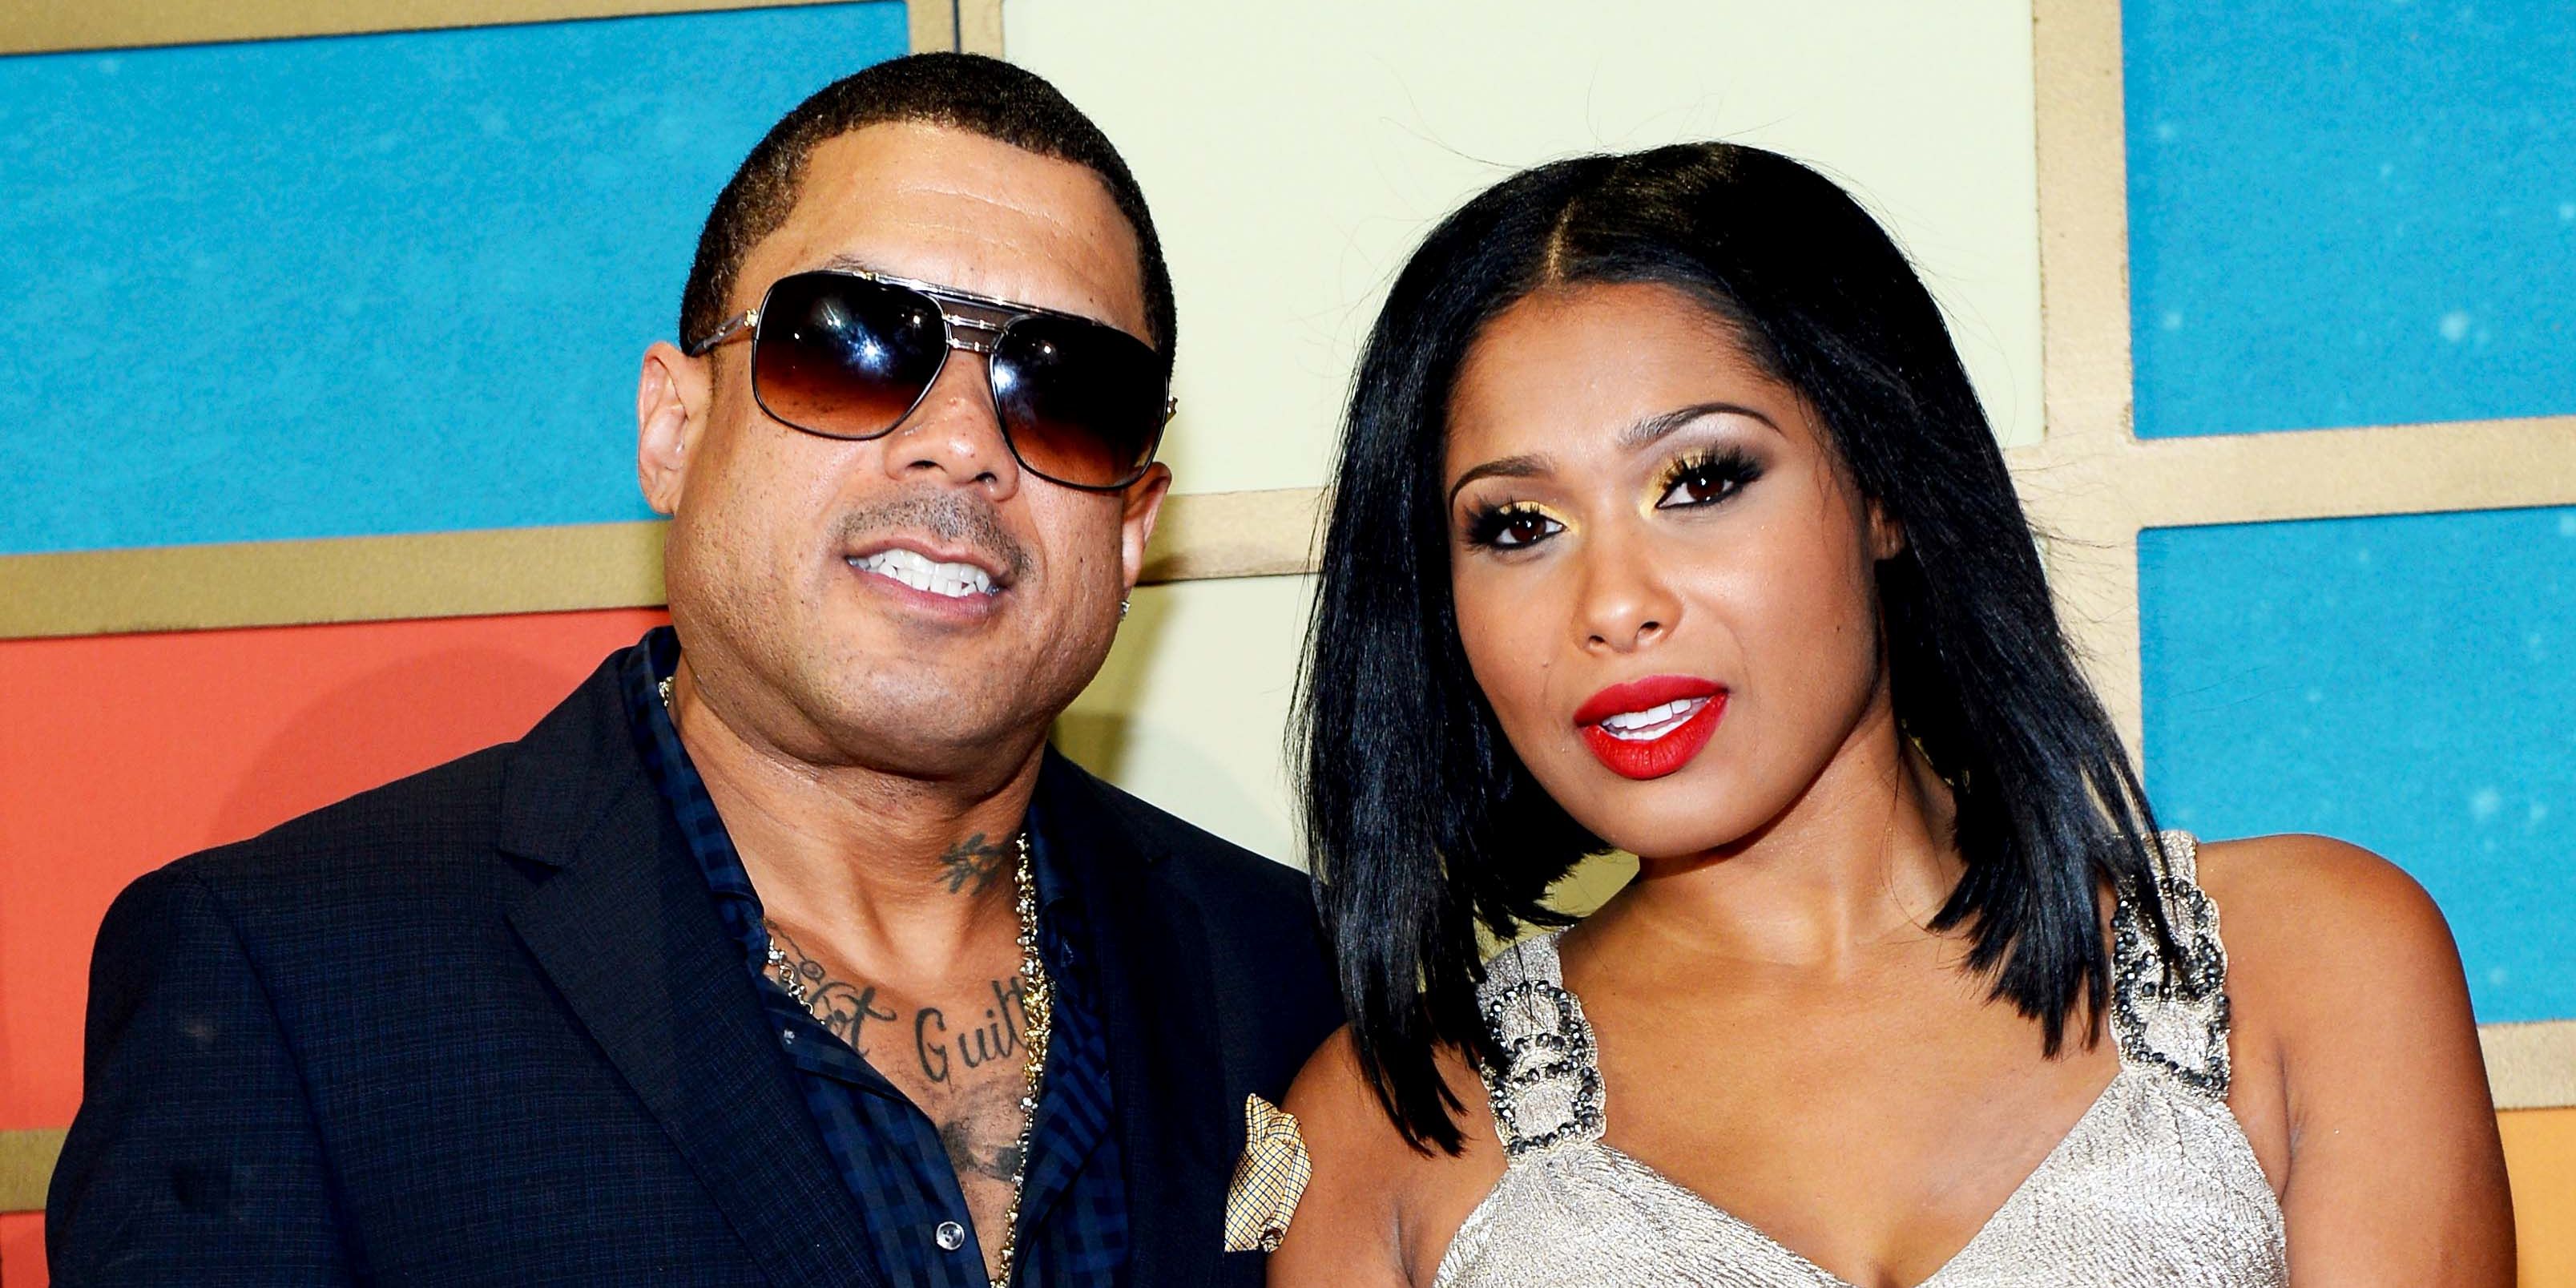 Love & Hip-Hop Star Althea Eaton Busted for Smacking Benzino.